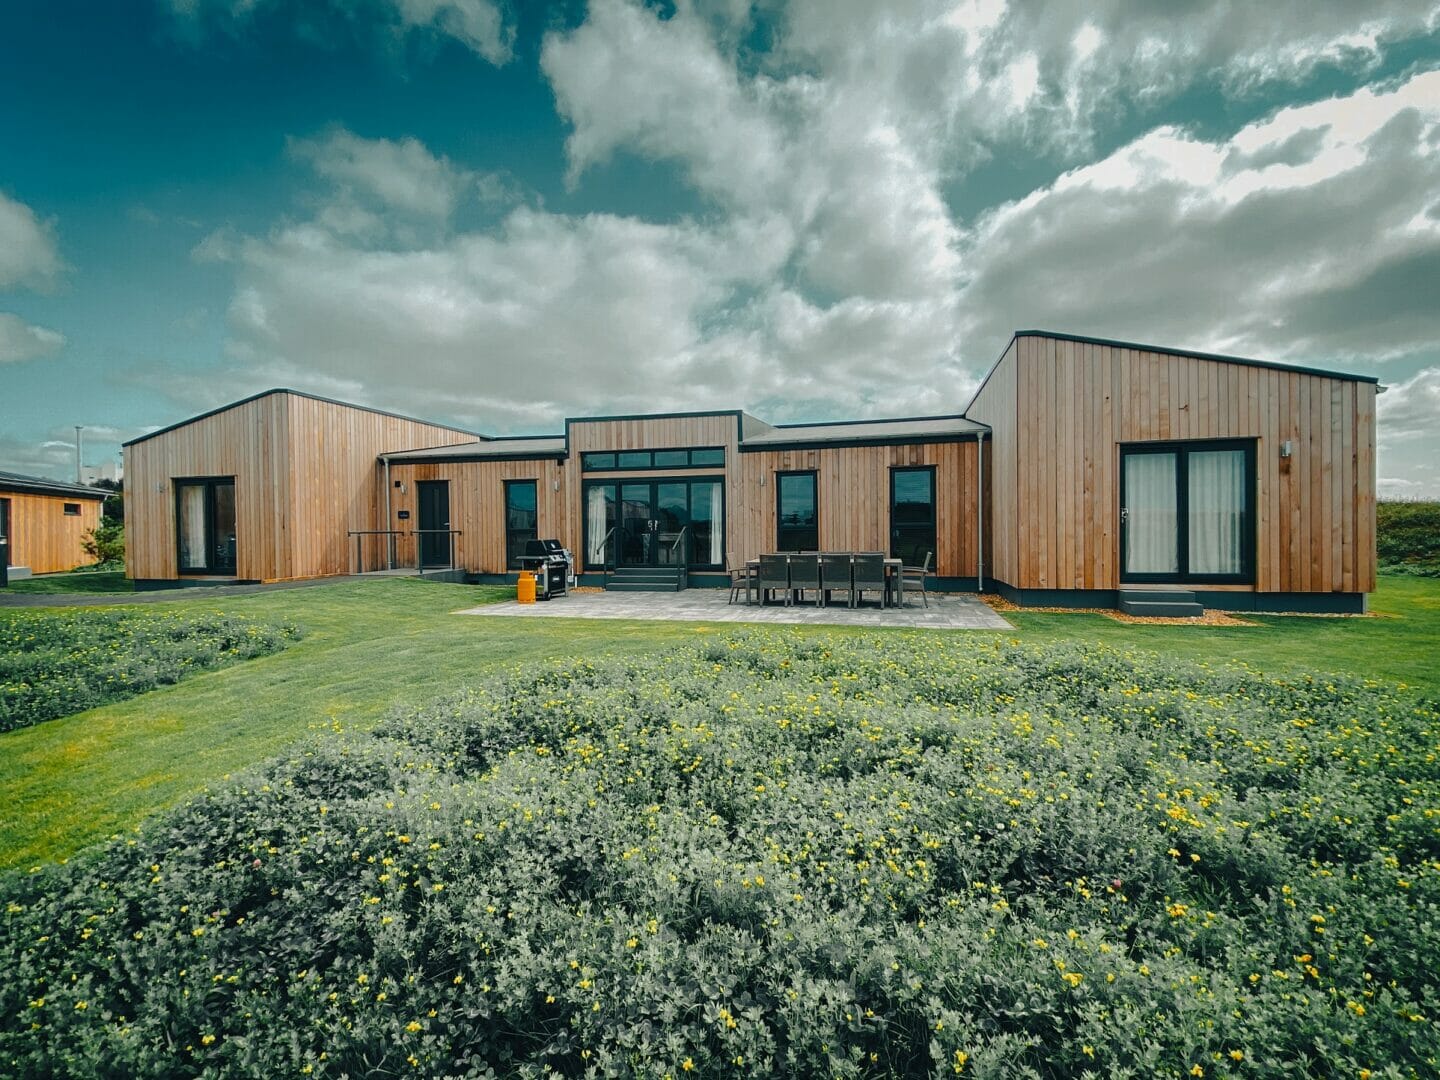 LUXURY LODGES COMPLETE LATEST PHASE OF £25M INVESTMENT AT DUNDONALD LINKS